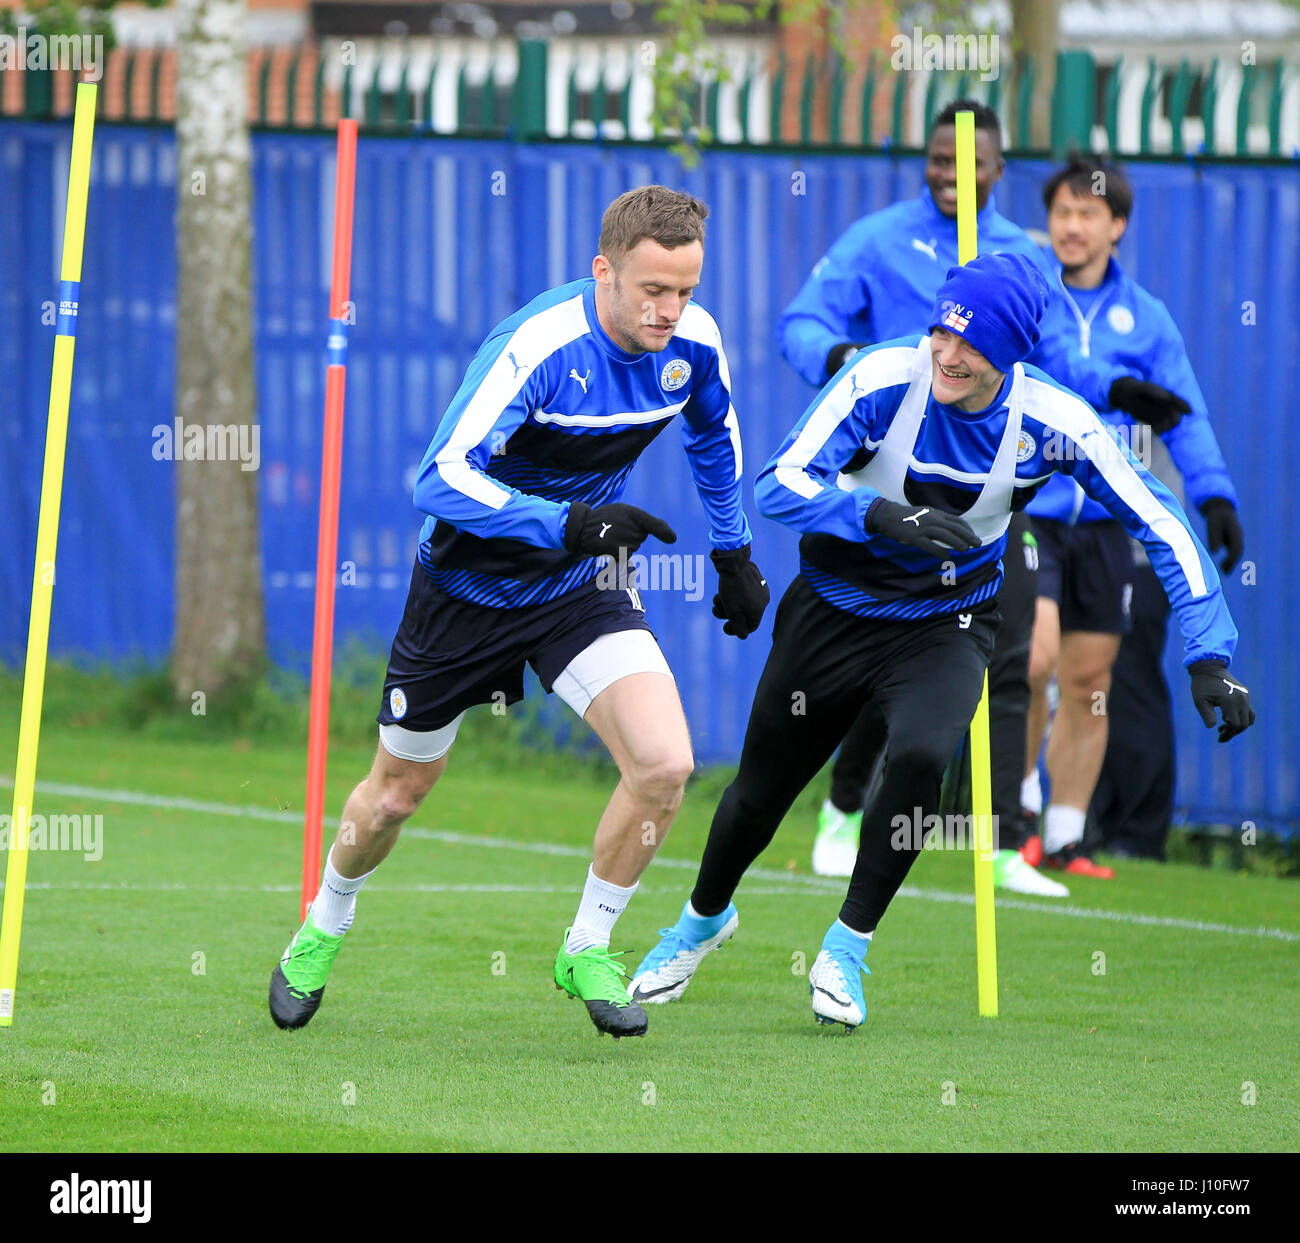 Leicester, England, 17th, April, 2017.   LCFC strikers Jamie Vardy and Andy King training at the Belvoir Drive ground in readiness for the second leg of the UEFA Champions League Quarter Final tie with Atletico Madrid.  © Phil Hutchinson/Alamy Live News Stock Photo